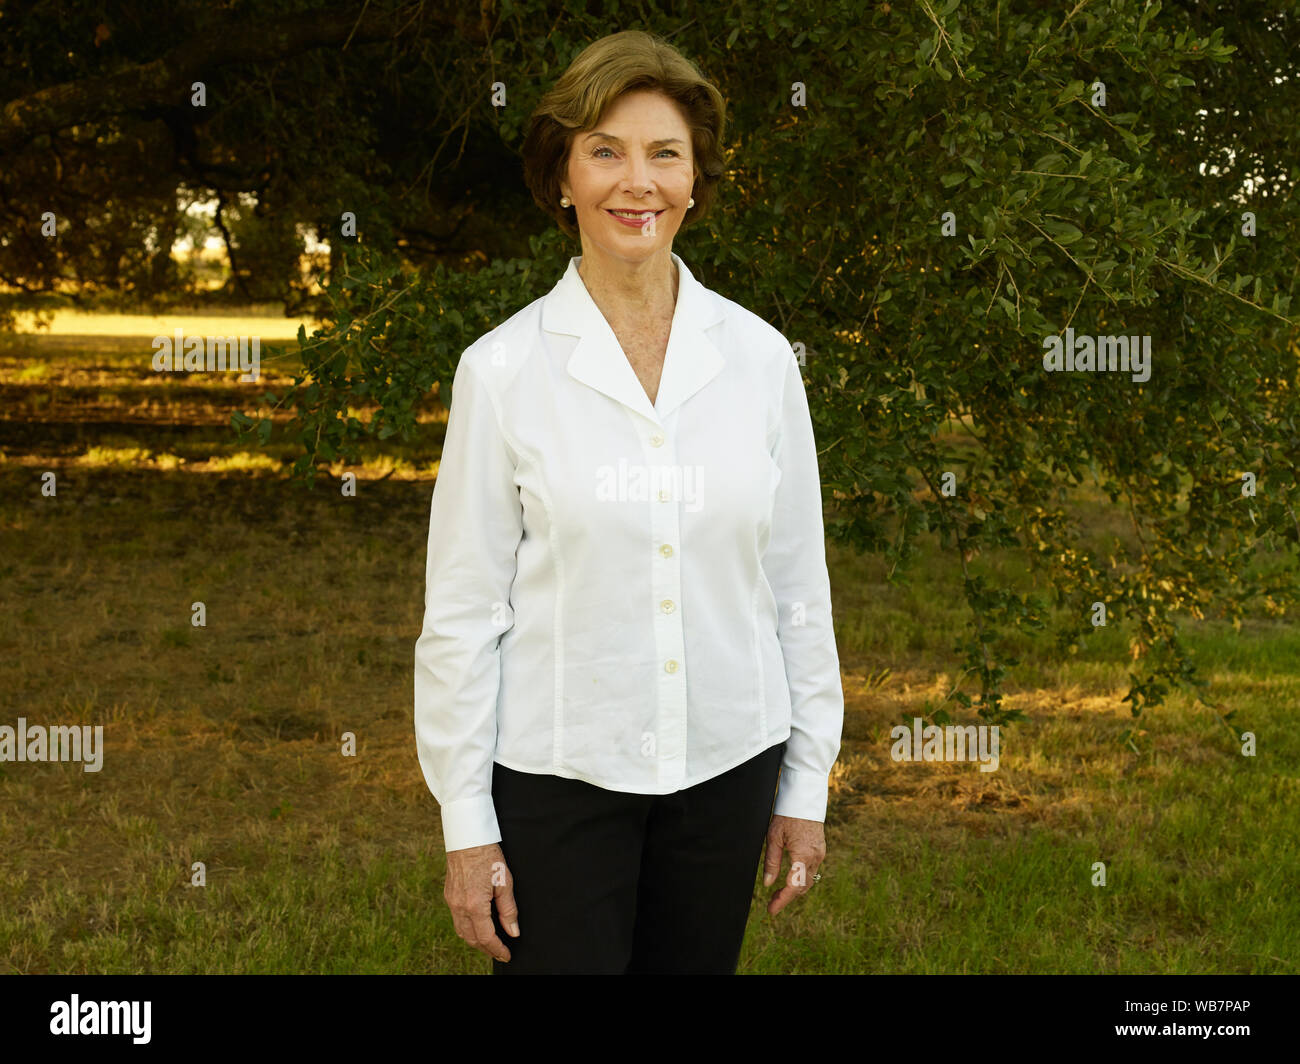 Former U.S. first lady Laura Bush at her and former president George W. Bush's 1,600-acre ranch, site of the Texas White House during their visits there during the Bush presidency, near Crawford in McLennon County, Texas Stock Photo